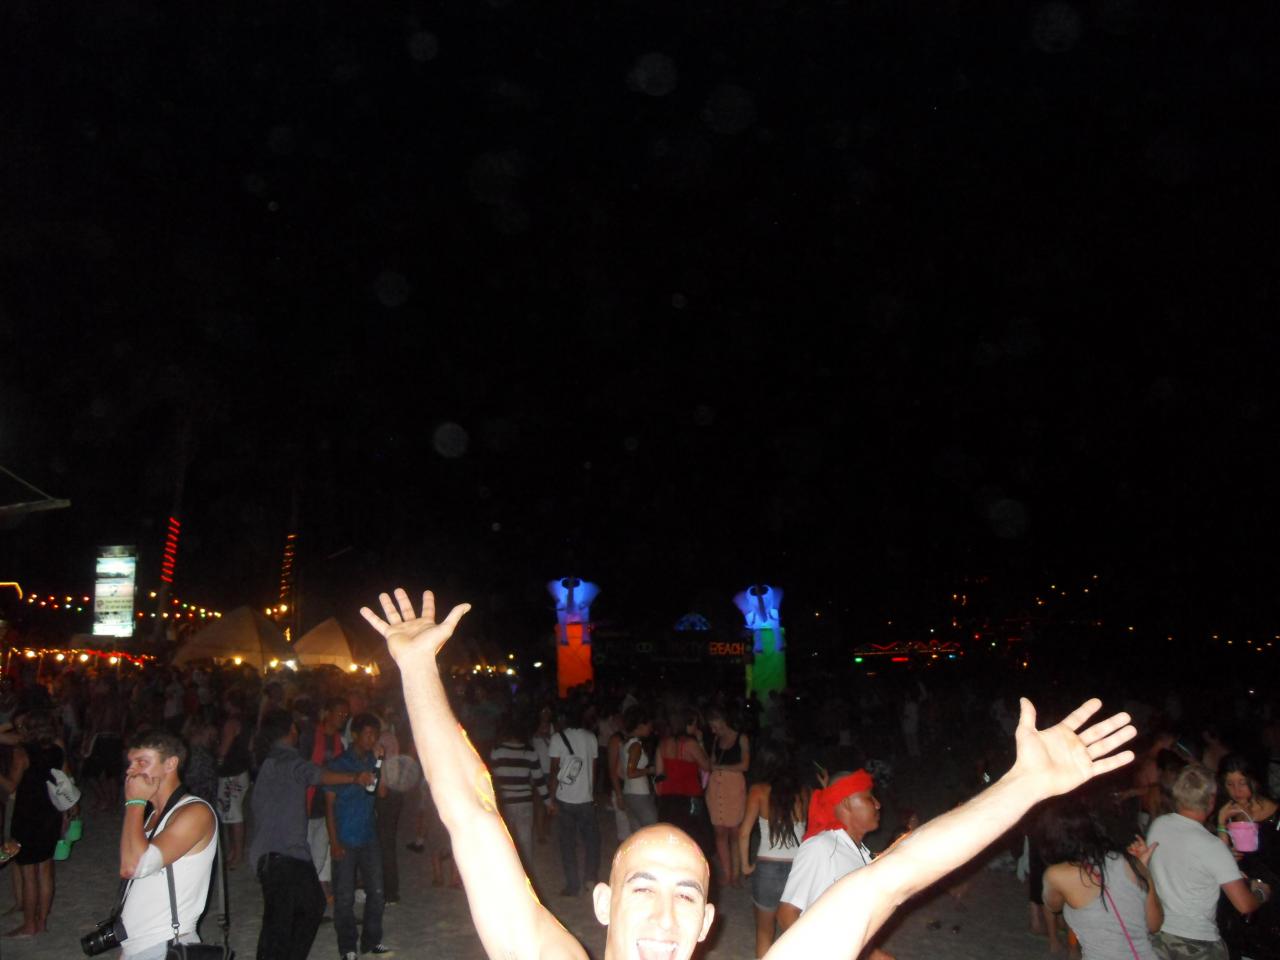 Excited to be at Full Moon Party (this is not me)